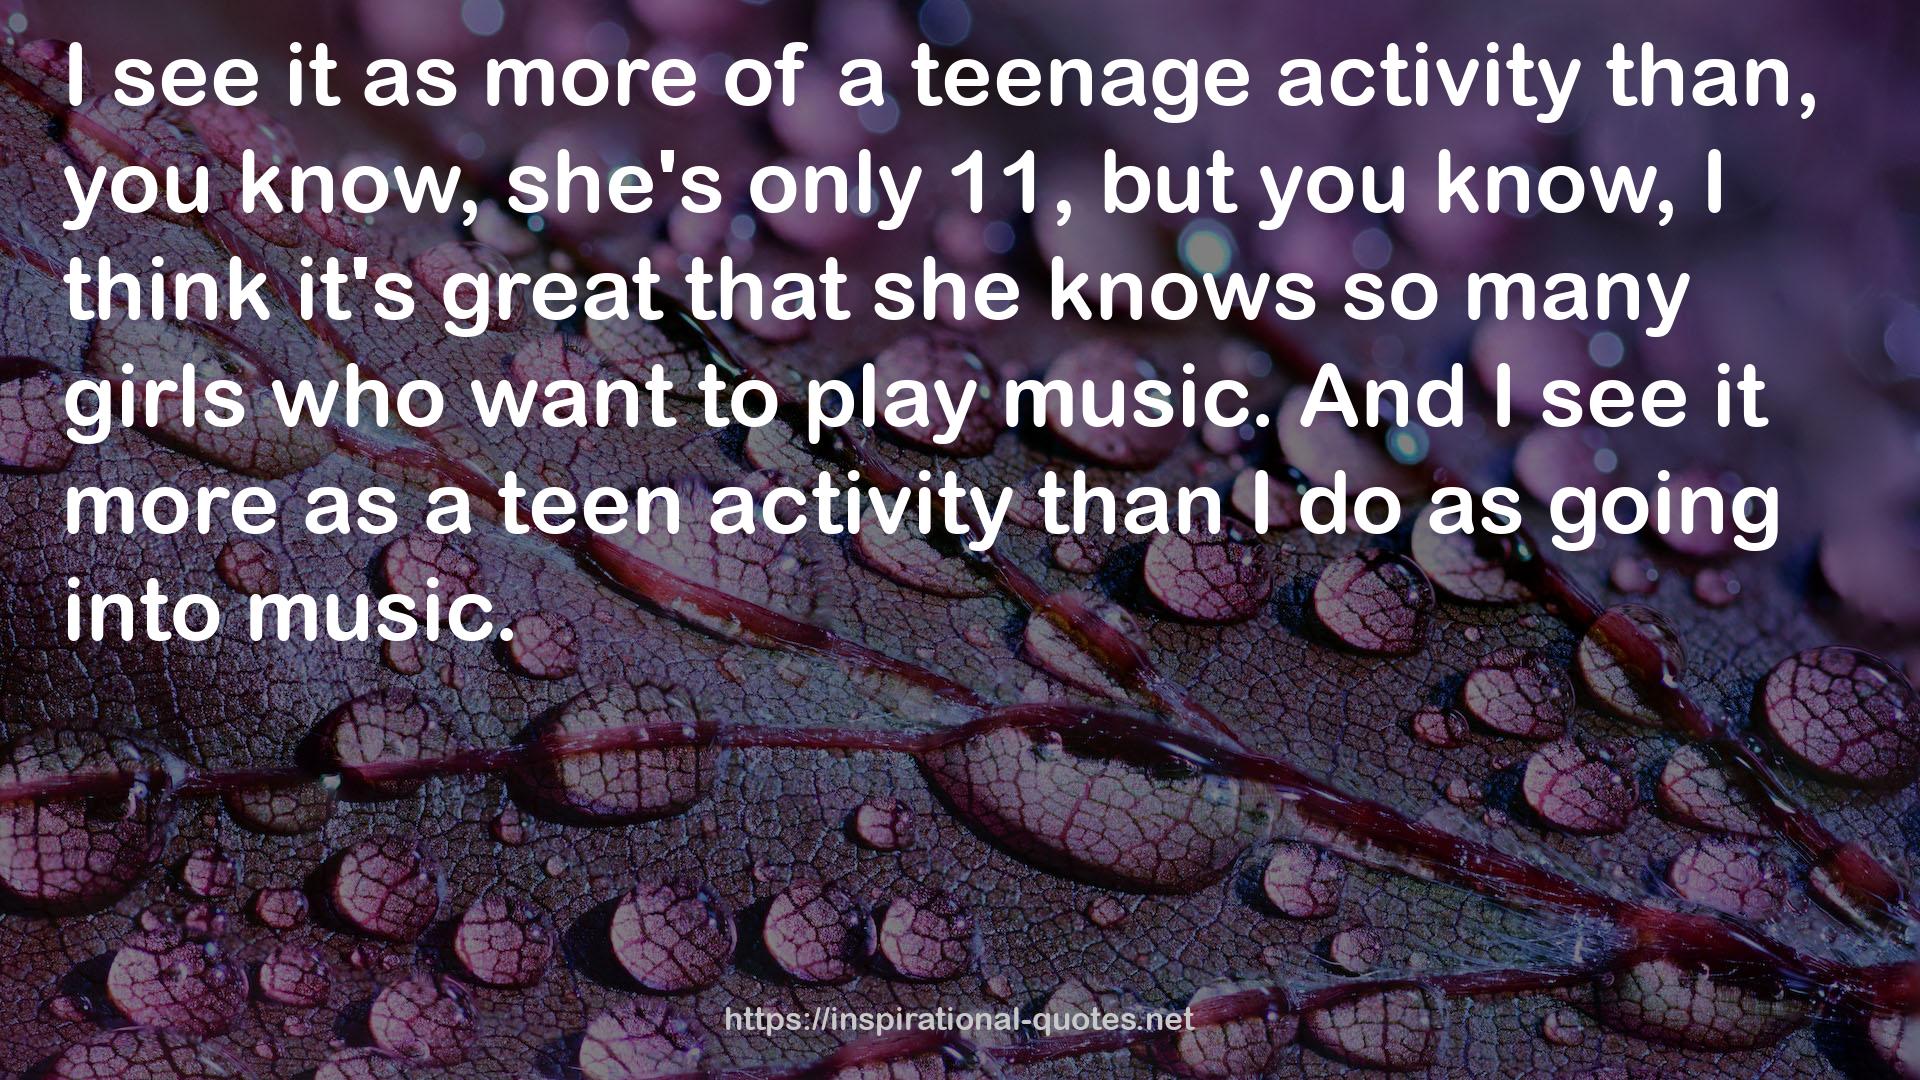 a teen activity  QUOTES